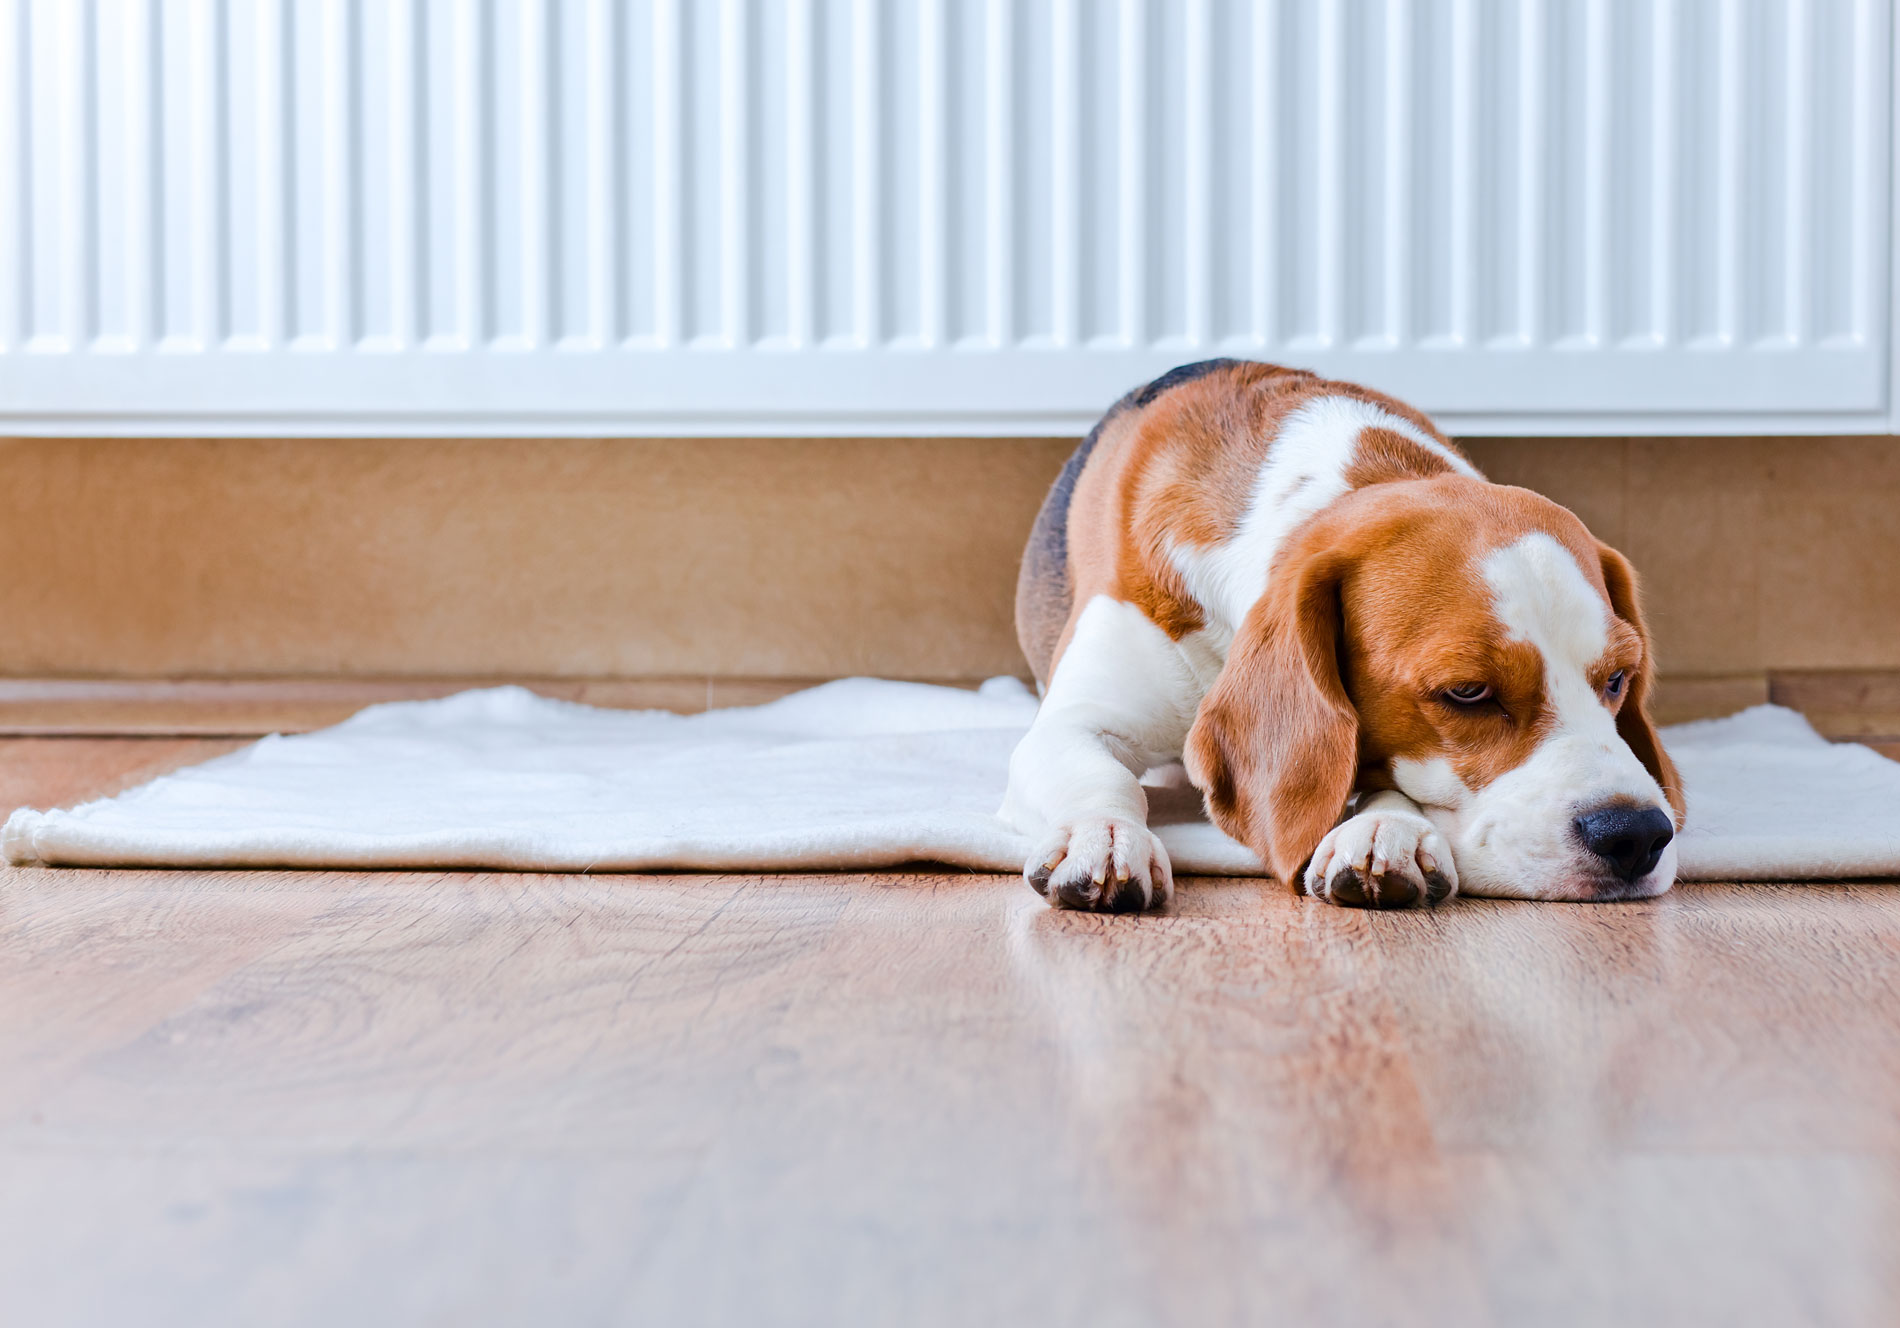 Buying a new heater? Here’s our Winter Heating Guide: Electric heating